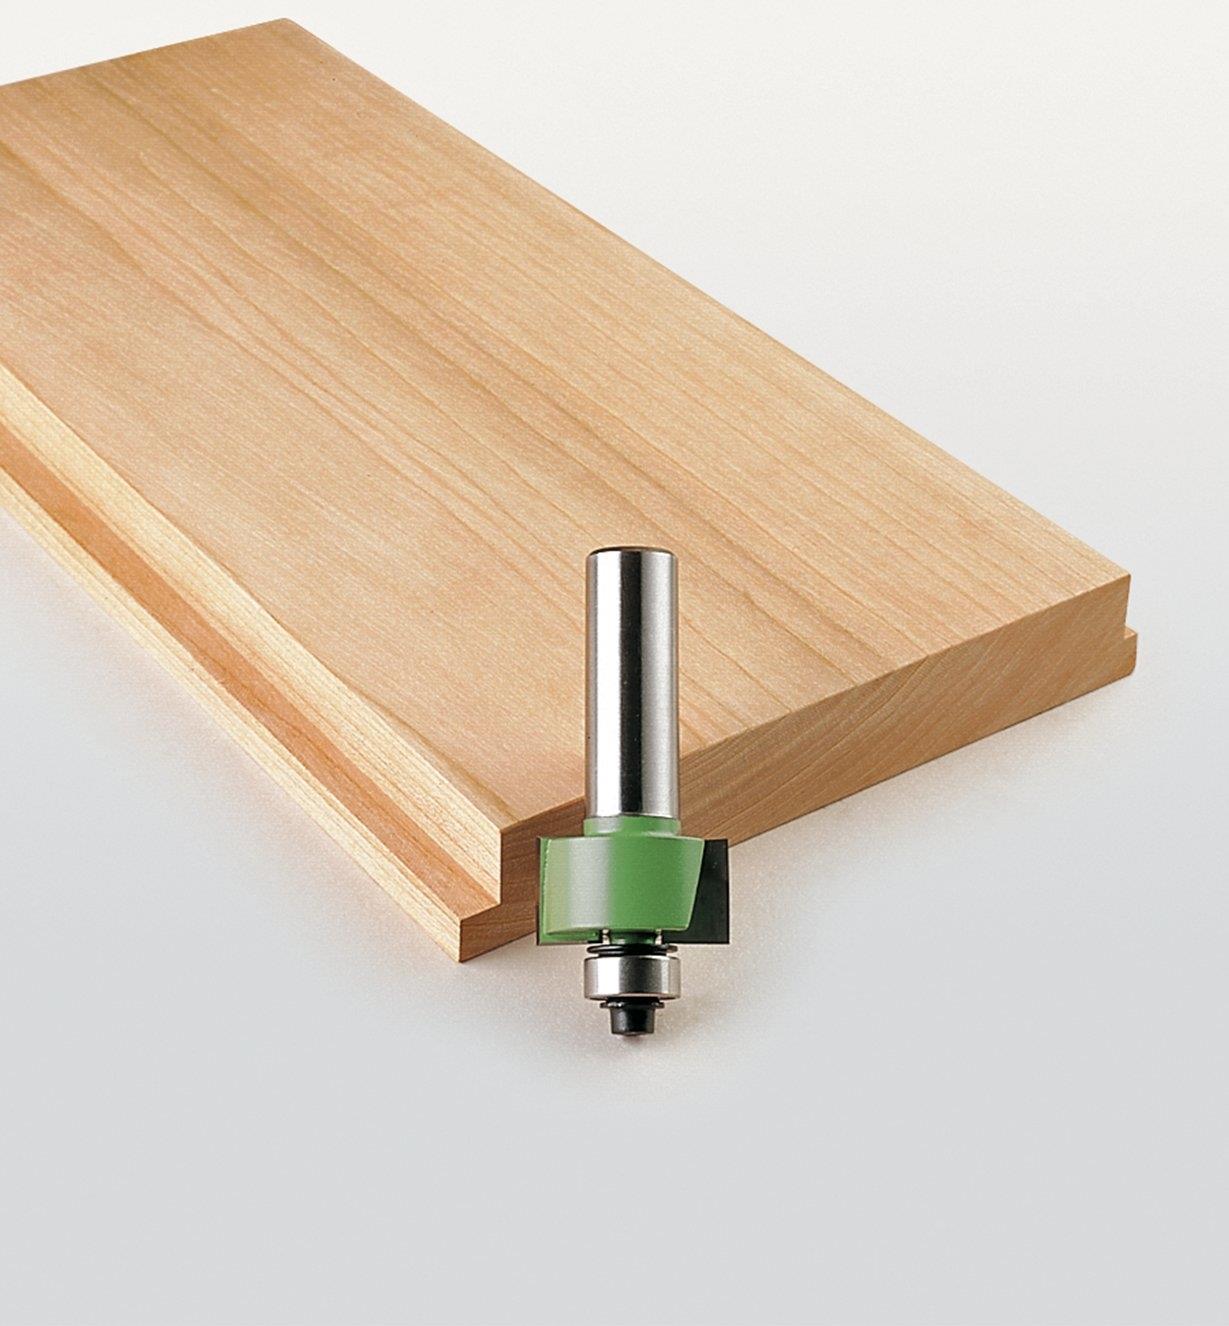 Small rabbeting bit next to a board with a rabbet cut along the edge